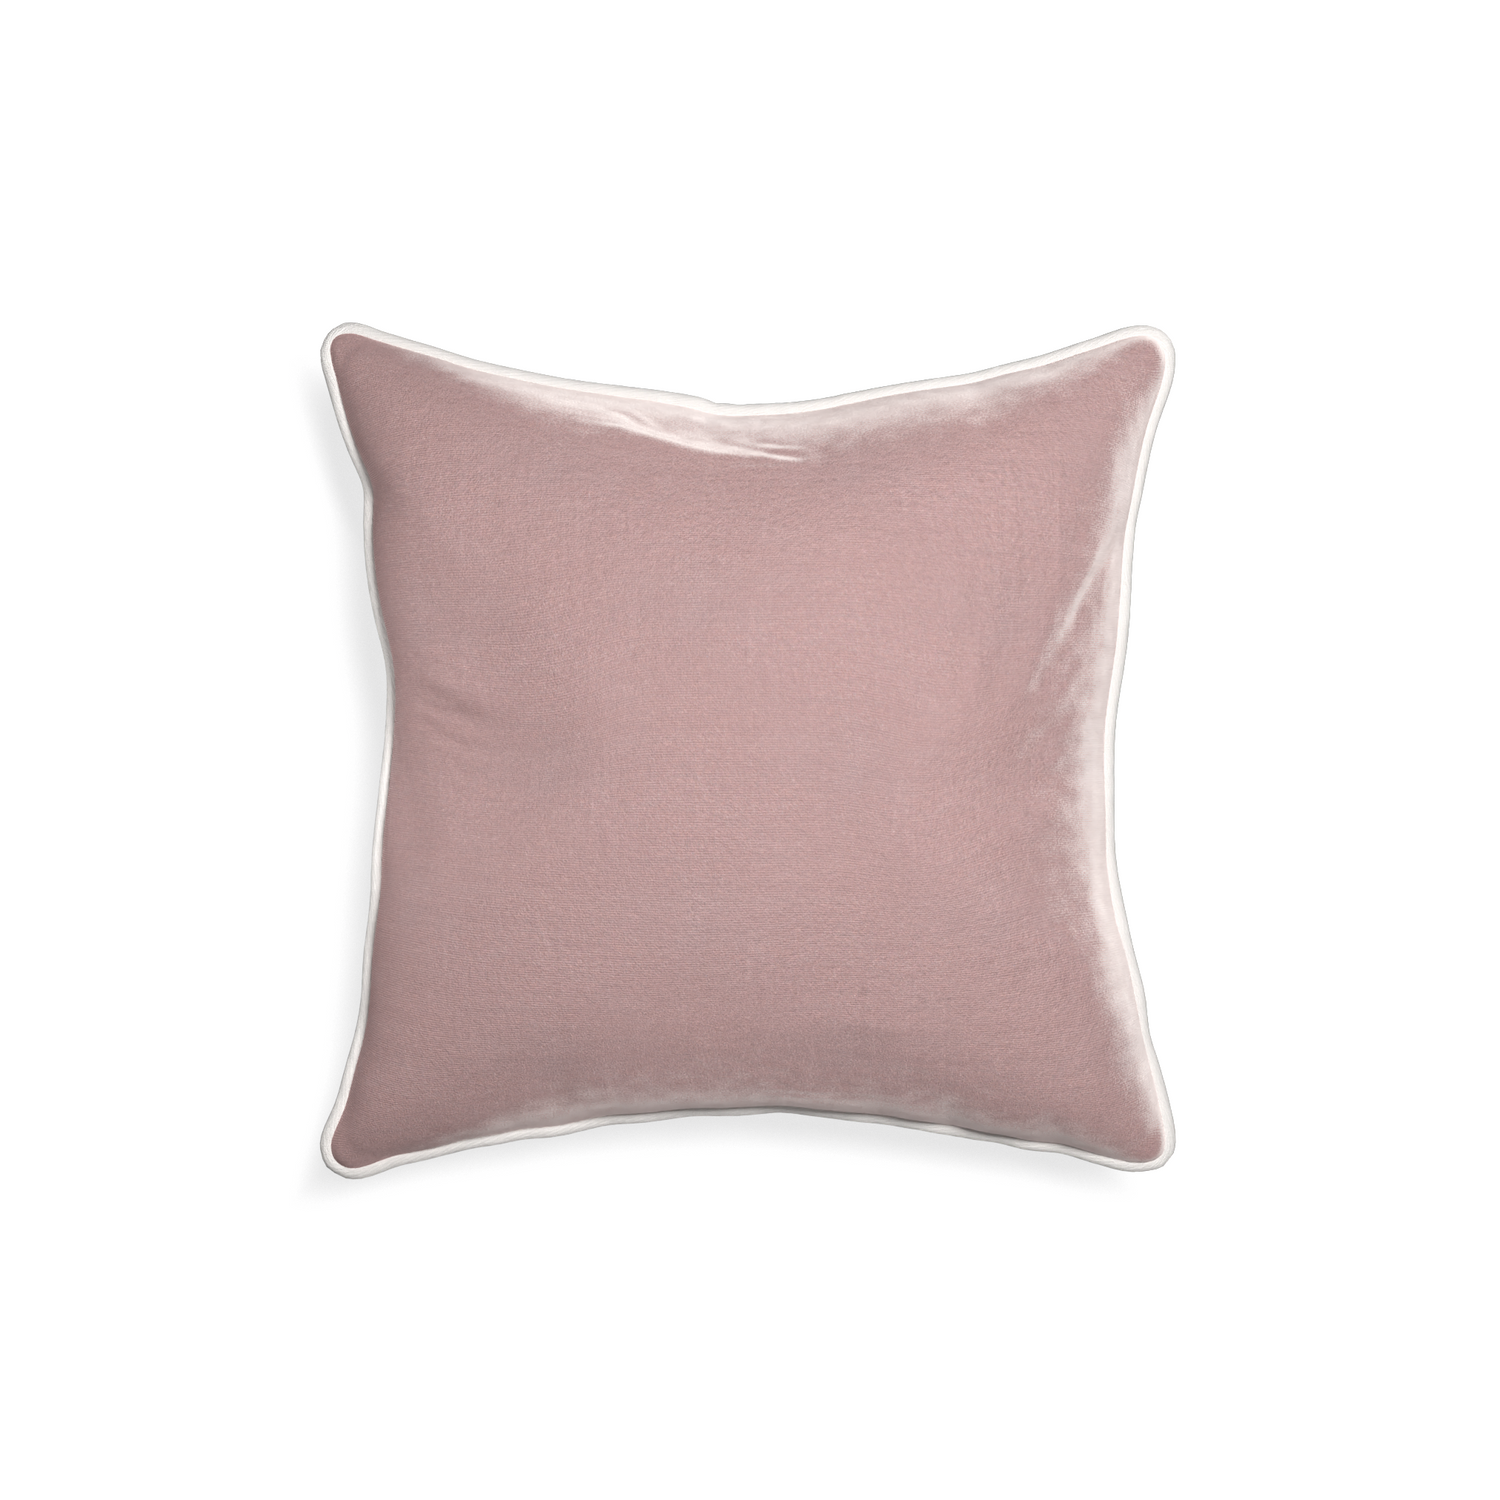 square mauve velvet pillow with white piping